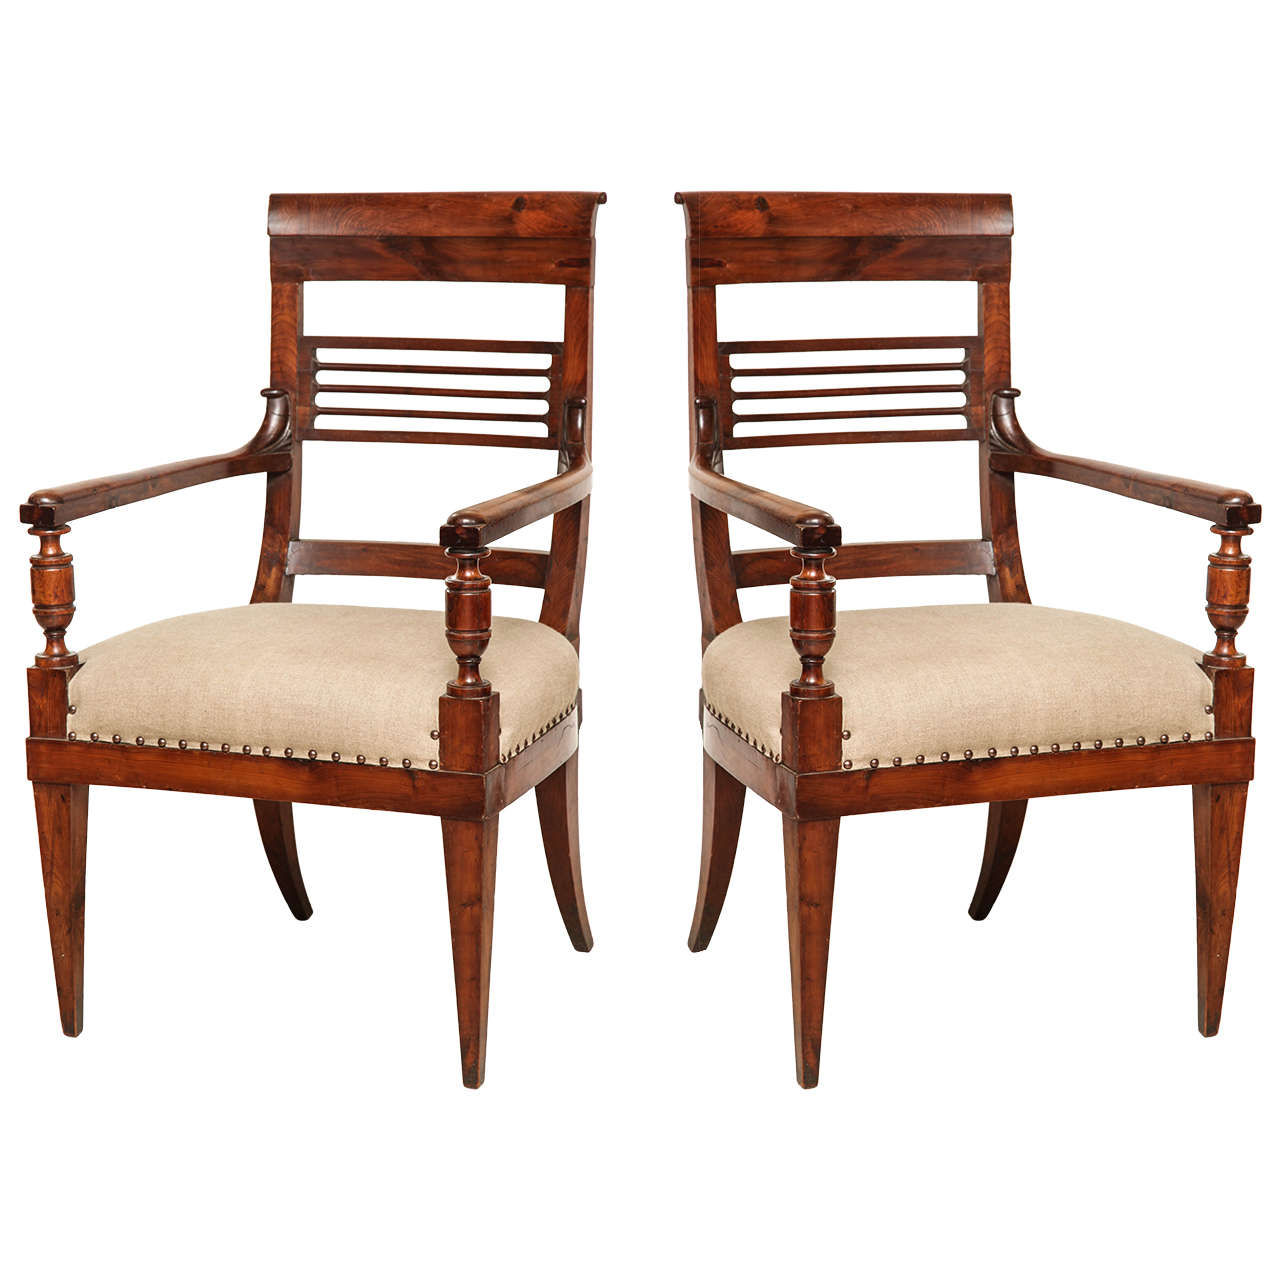 Pair of 19th Century Yew Wood Armchairs with Slated Back